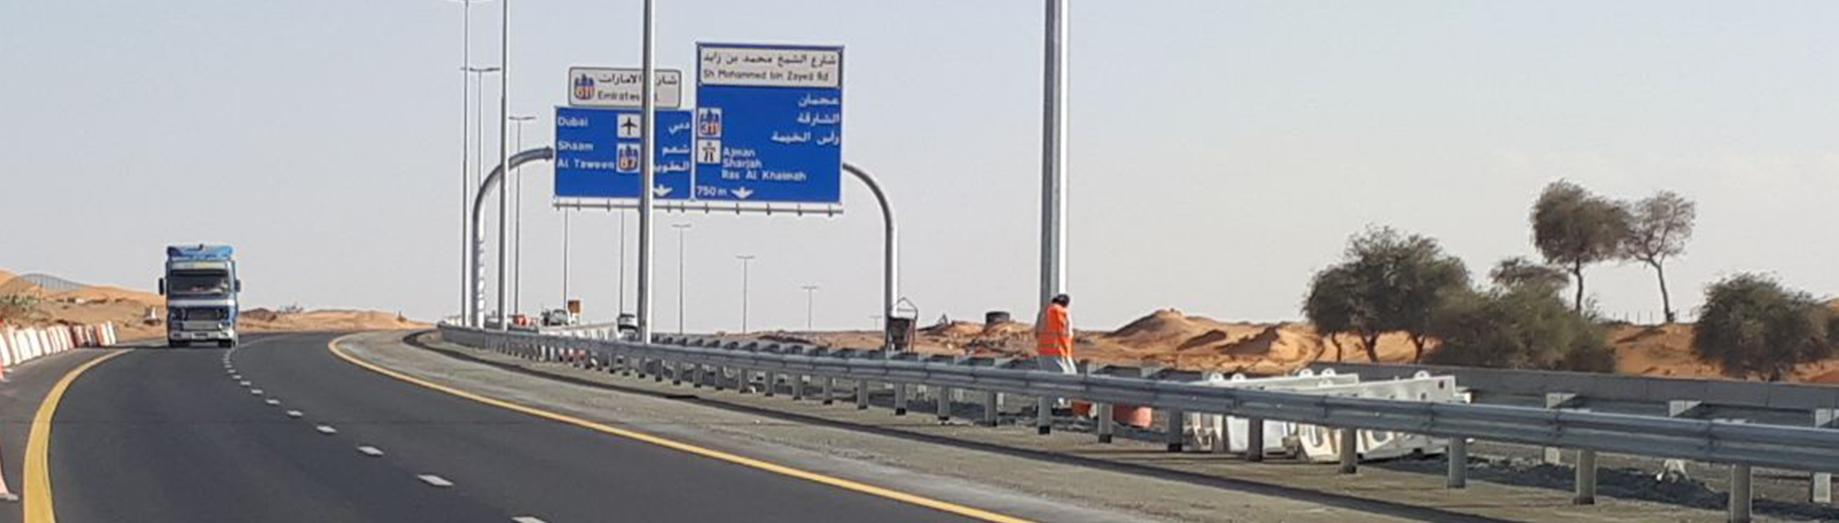 Development and Upgrading of Al Ittihad-Taween Road - 2nd Stage